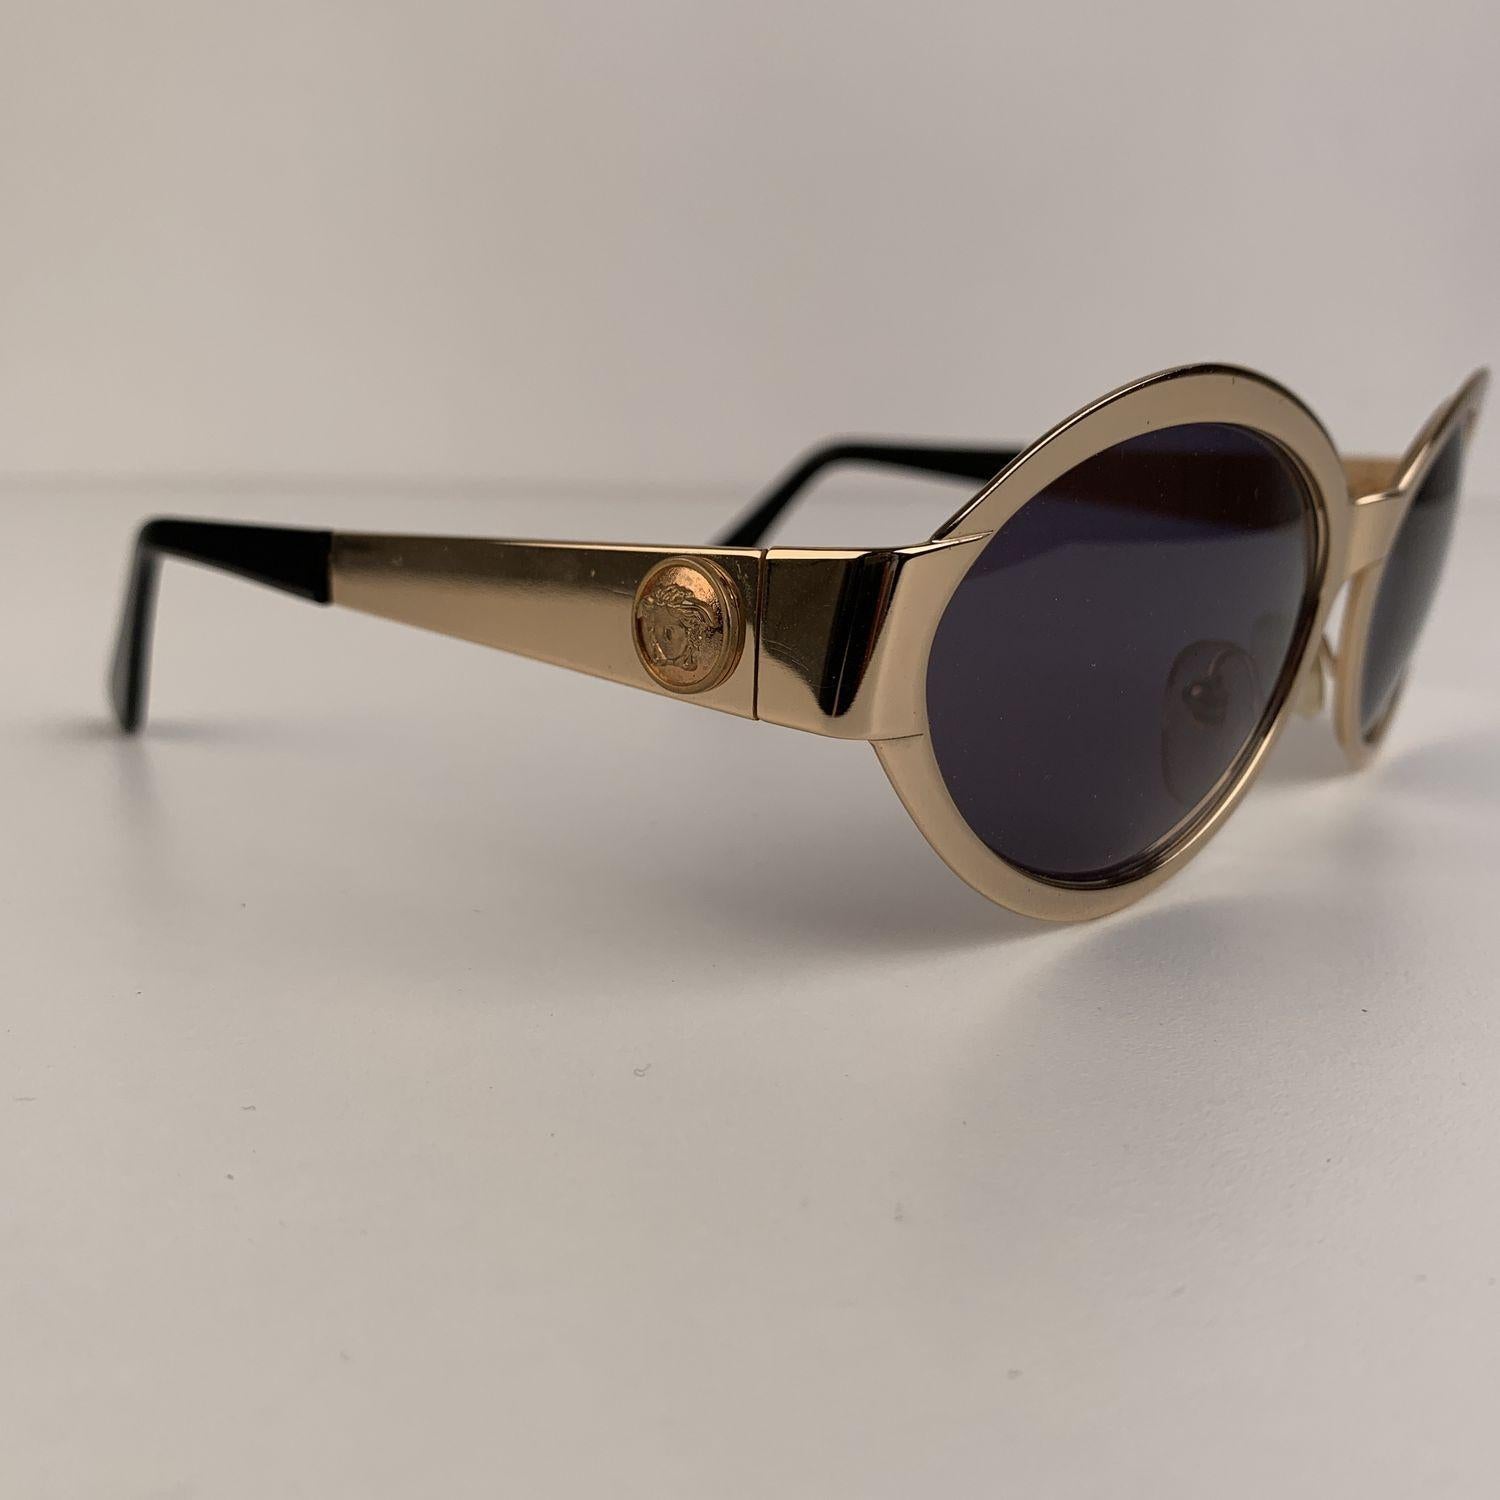 Beautiful vintage Gianni Versace Mod S 97, Col. 030 sunglasses. Gold metal oval frame with gray original lenses. Gold metal Medusa heads on temples. Adjustable nose pads . Made in Italy. Details MATERIAL: Metal COLOR: Gold MODEL: S97 GENDER: Unisex